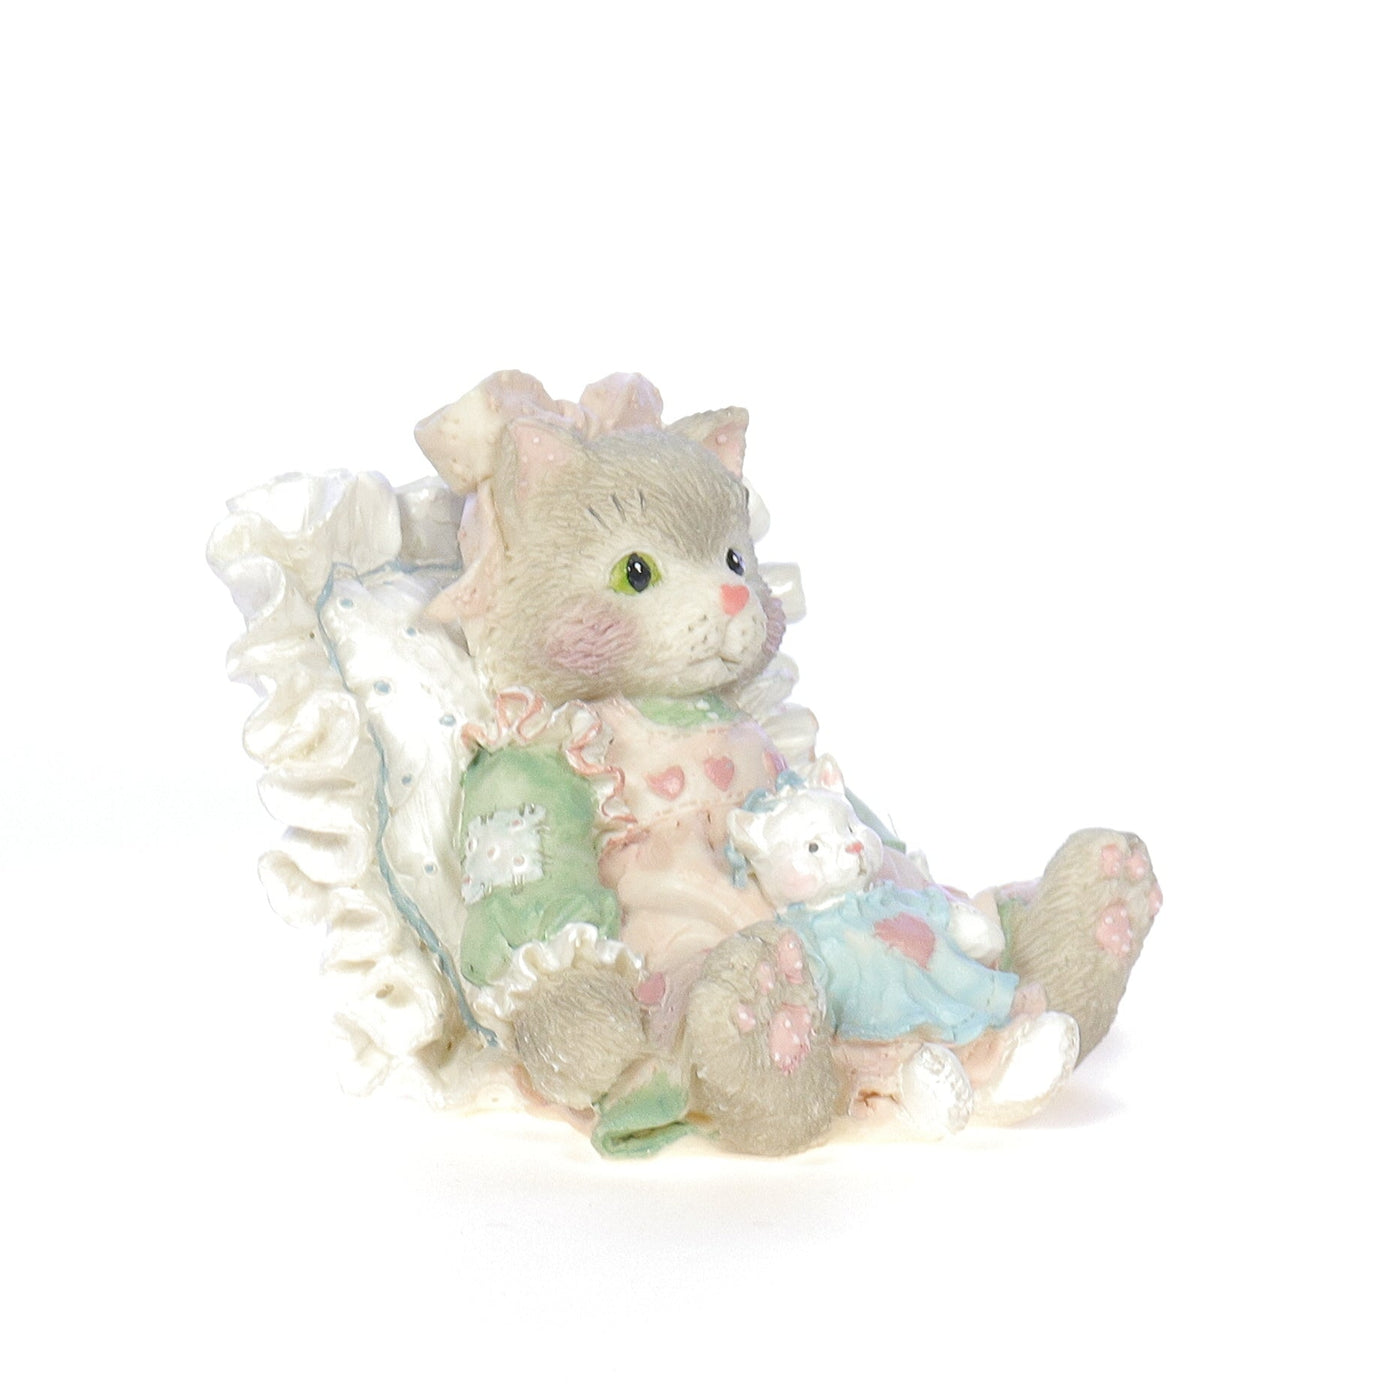 Calico_Kittens_Friends_Are_Cuddles_Of_Love_Friendship_Figurine_1992